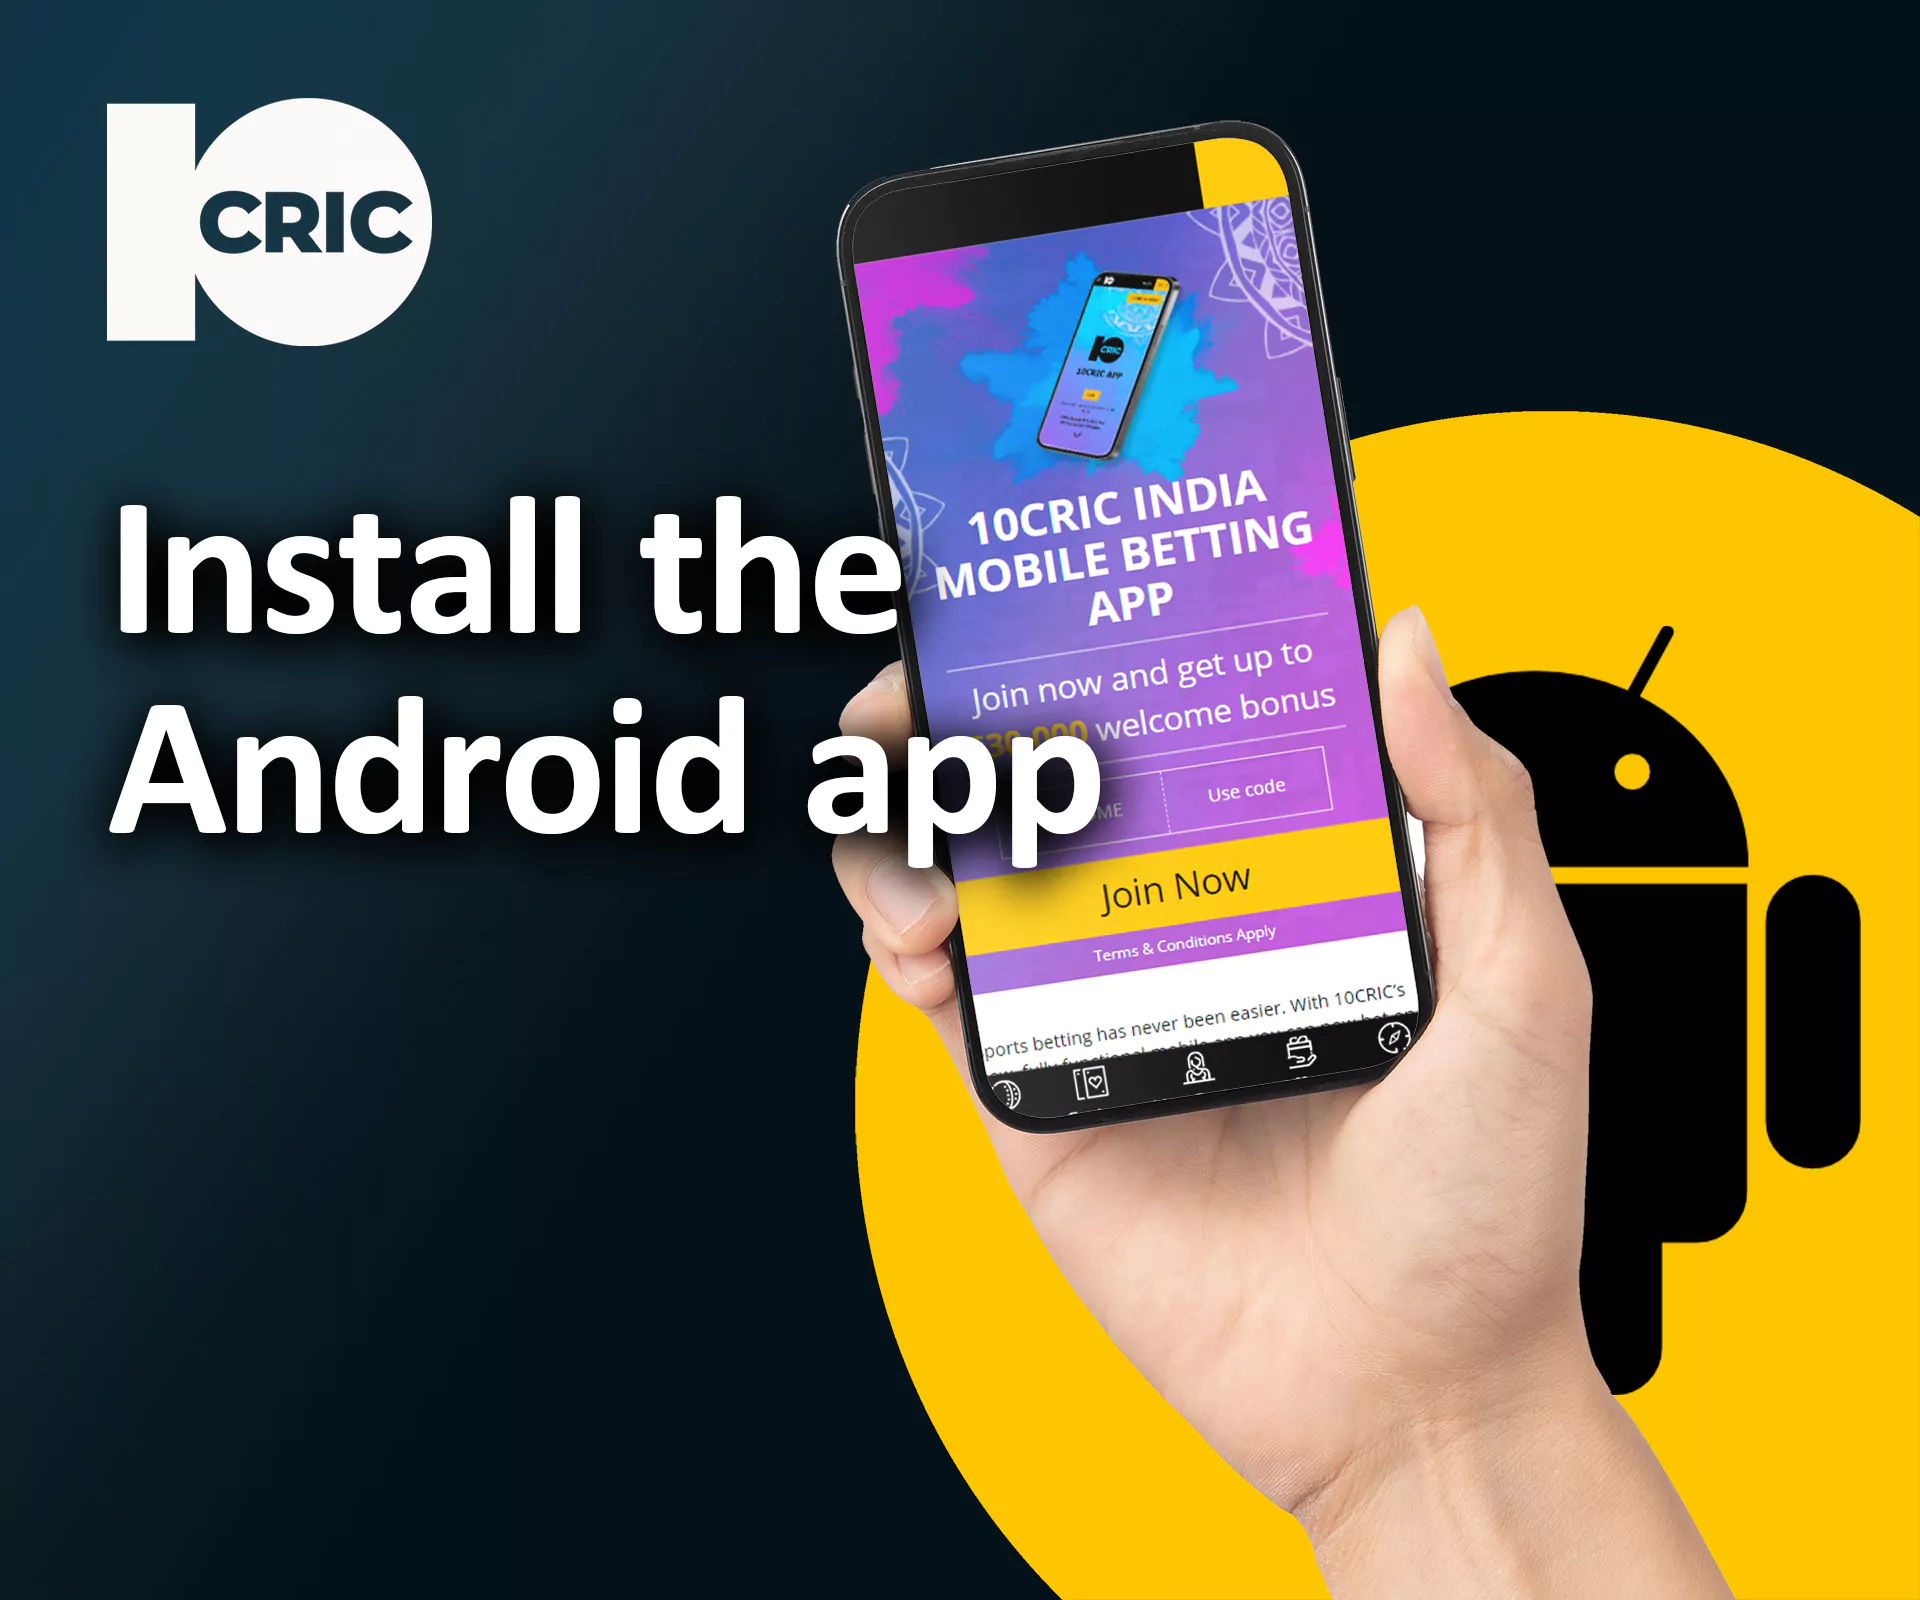 Download the 10cric Android app on your phone.